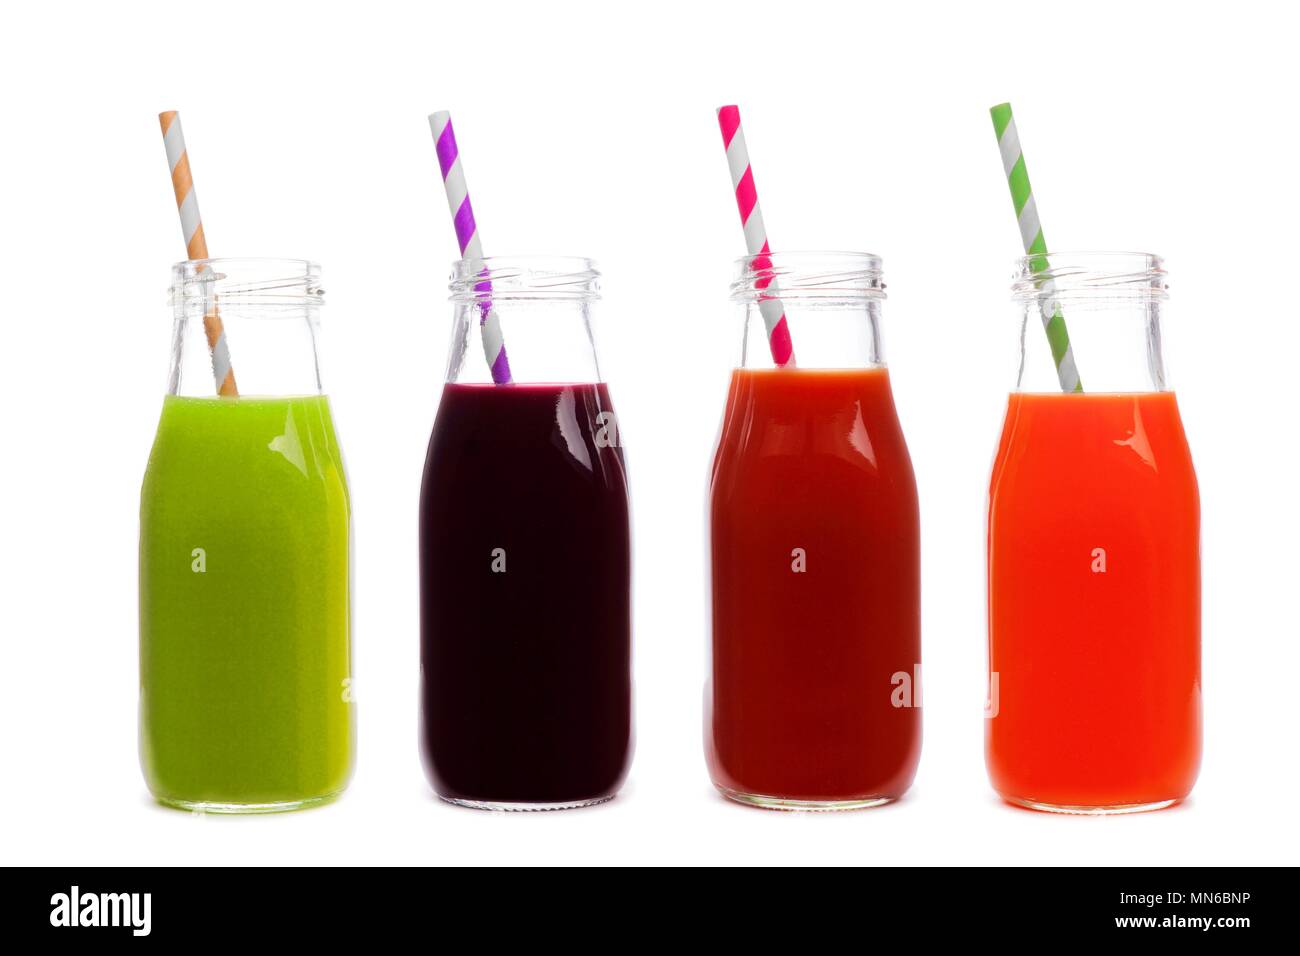 Four bottles of vegetable juice, greens, beet, tomato, and carrot, isolated on a white background Stock Photo